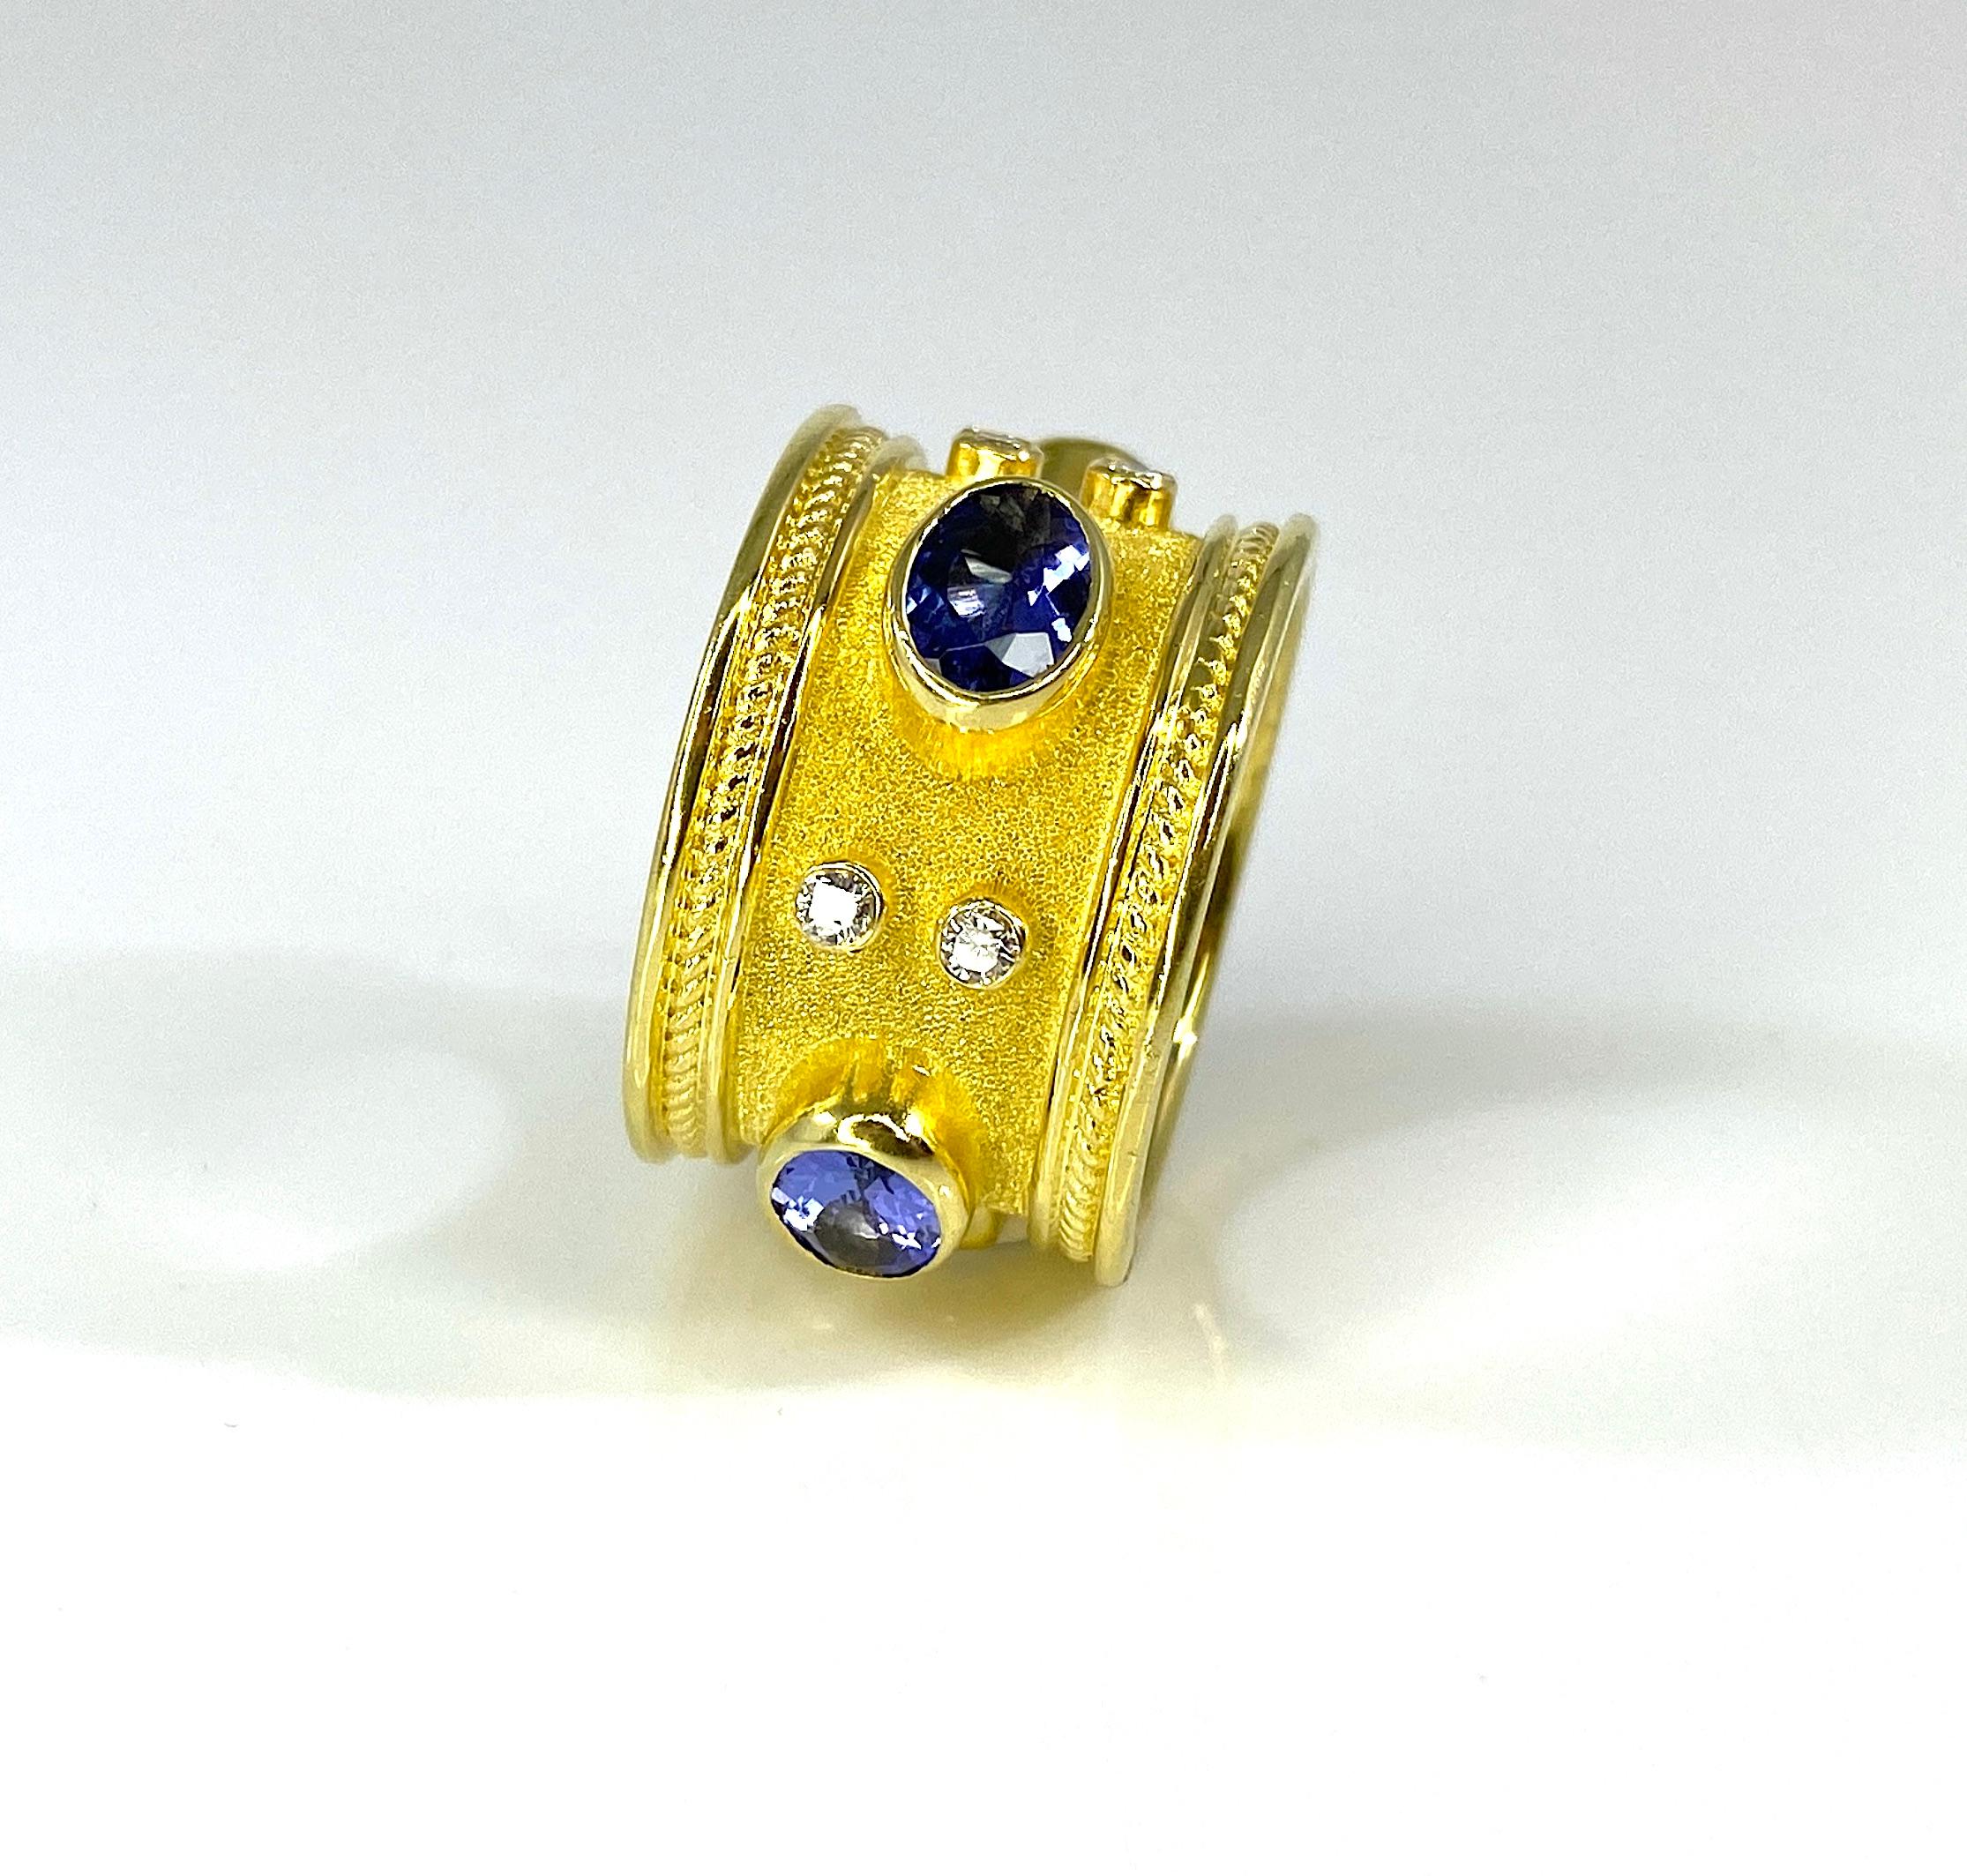 The is gorgeous S.Georgios designer 18 Karat Solid Yellow Gold Wide Band Ring all handmade in Greece in the Byzantine style with very bold elegant look. Ring features 4 oval cut Tanzanites in total weight of 2.78 Carats and 8 brilliant cut white